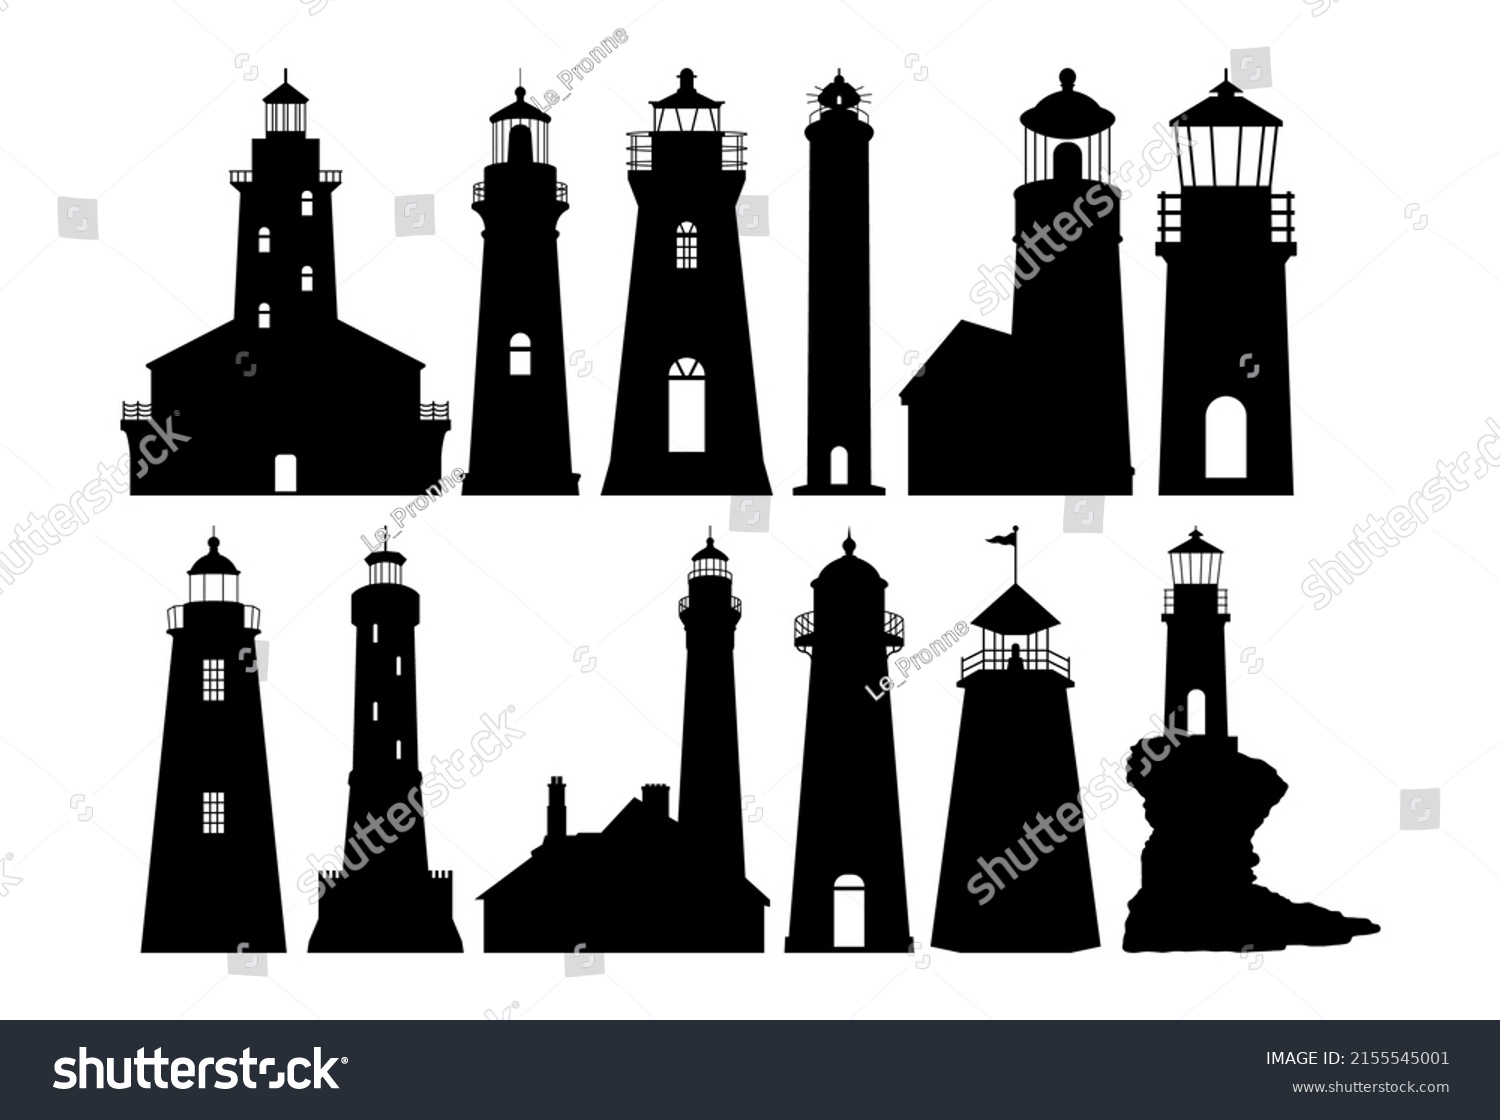 SVG of Lighthouse, set of black and white illustrations, silhouettes. Template for plotter lazer cutting of paper, wood. svg